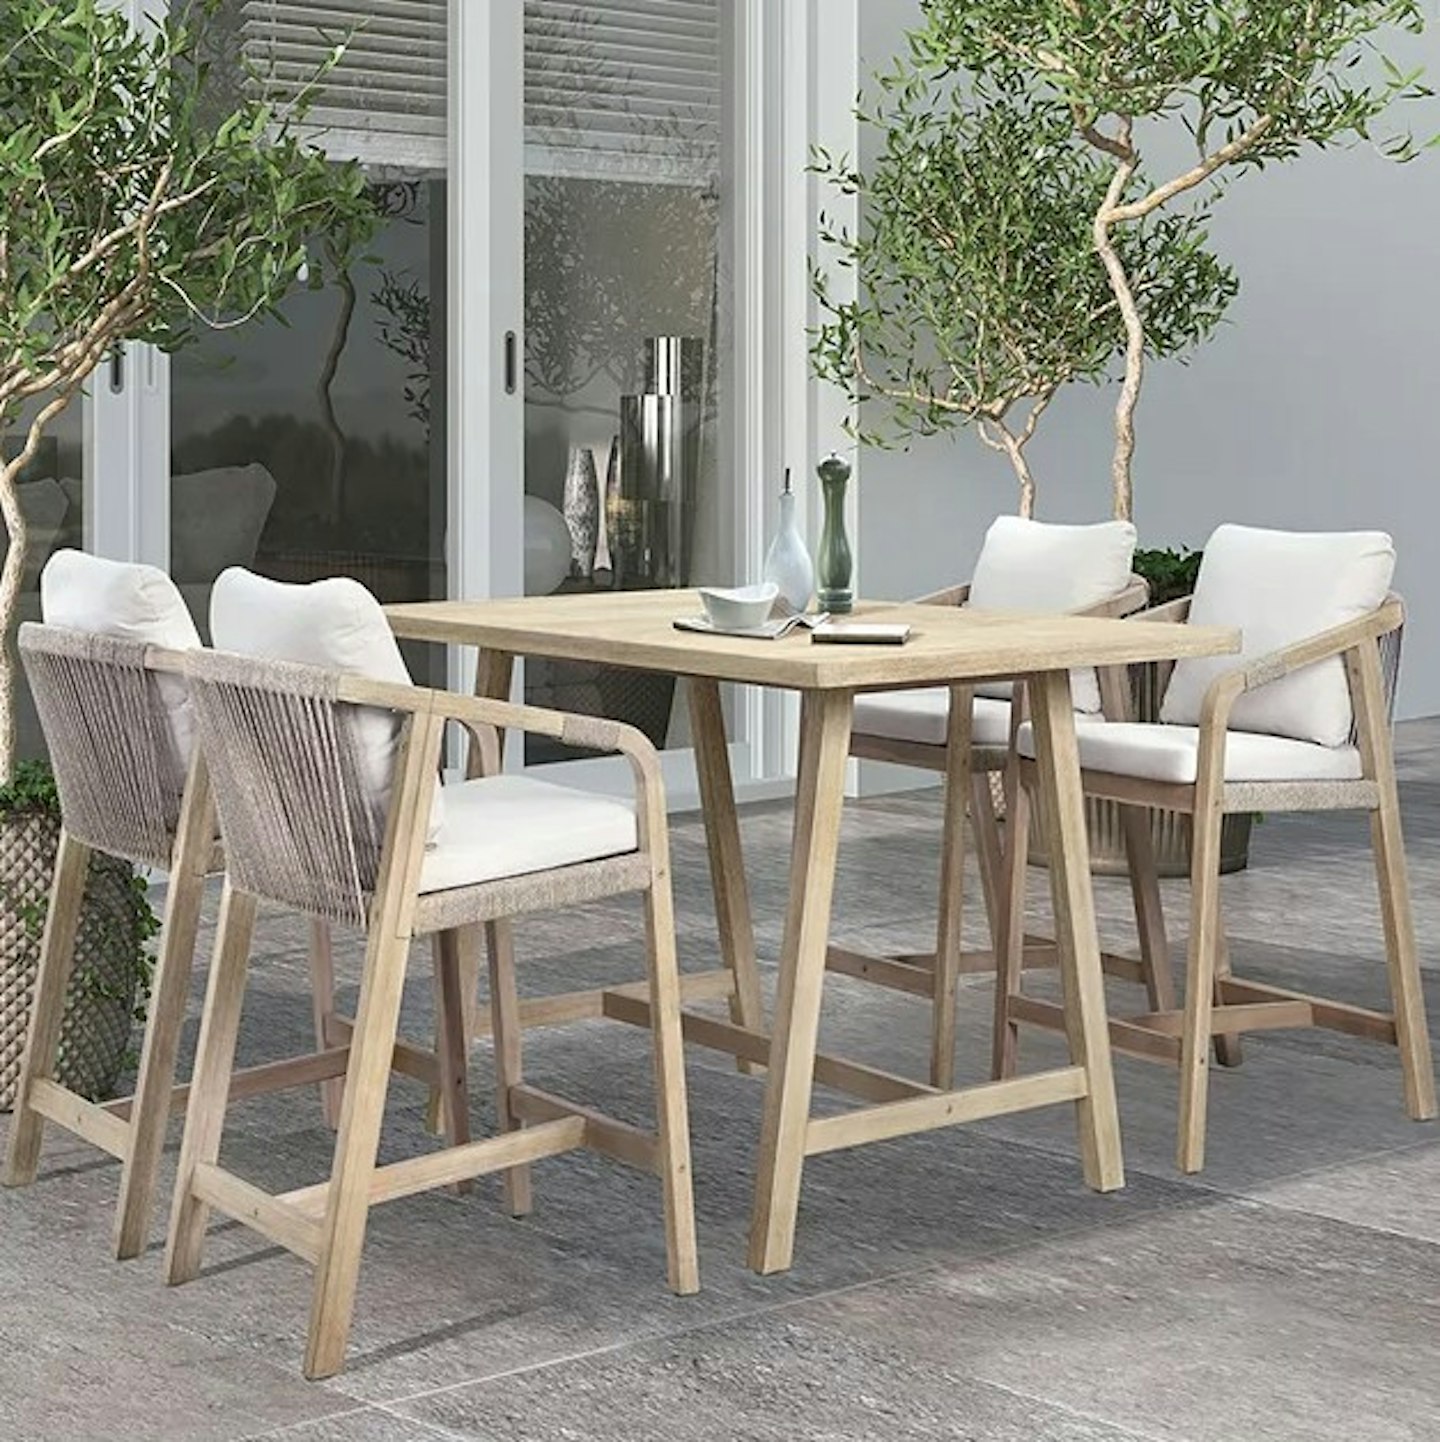 KETTLER Cora 4-Seater Garden Bar Dining Table & Chairs Set, FSC-Certified (Acacia Wood), Natural